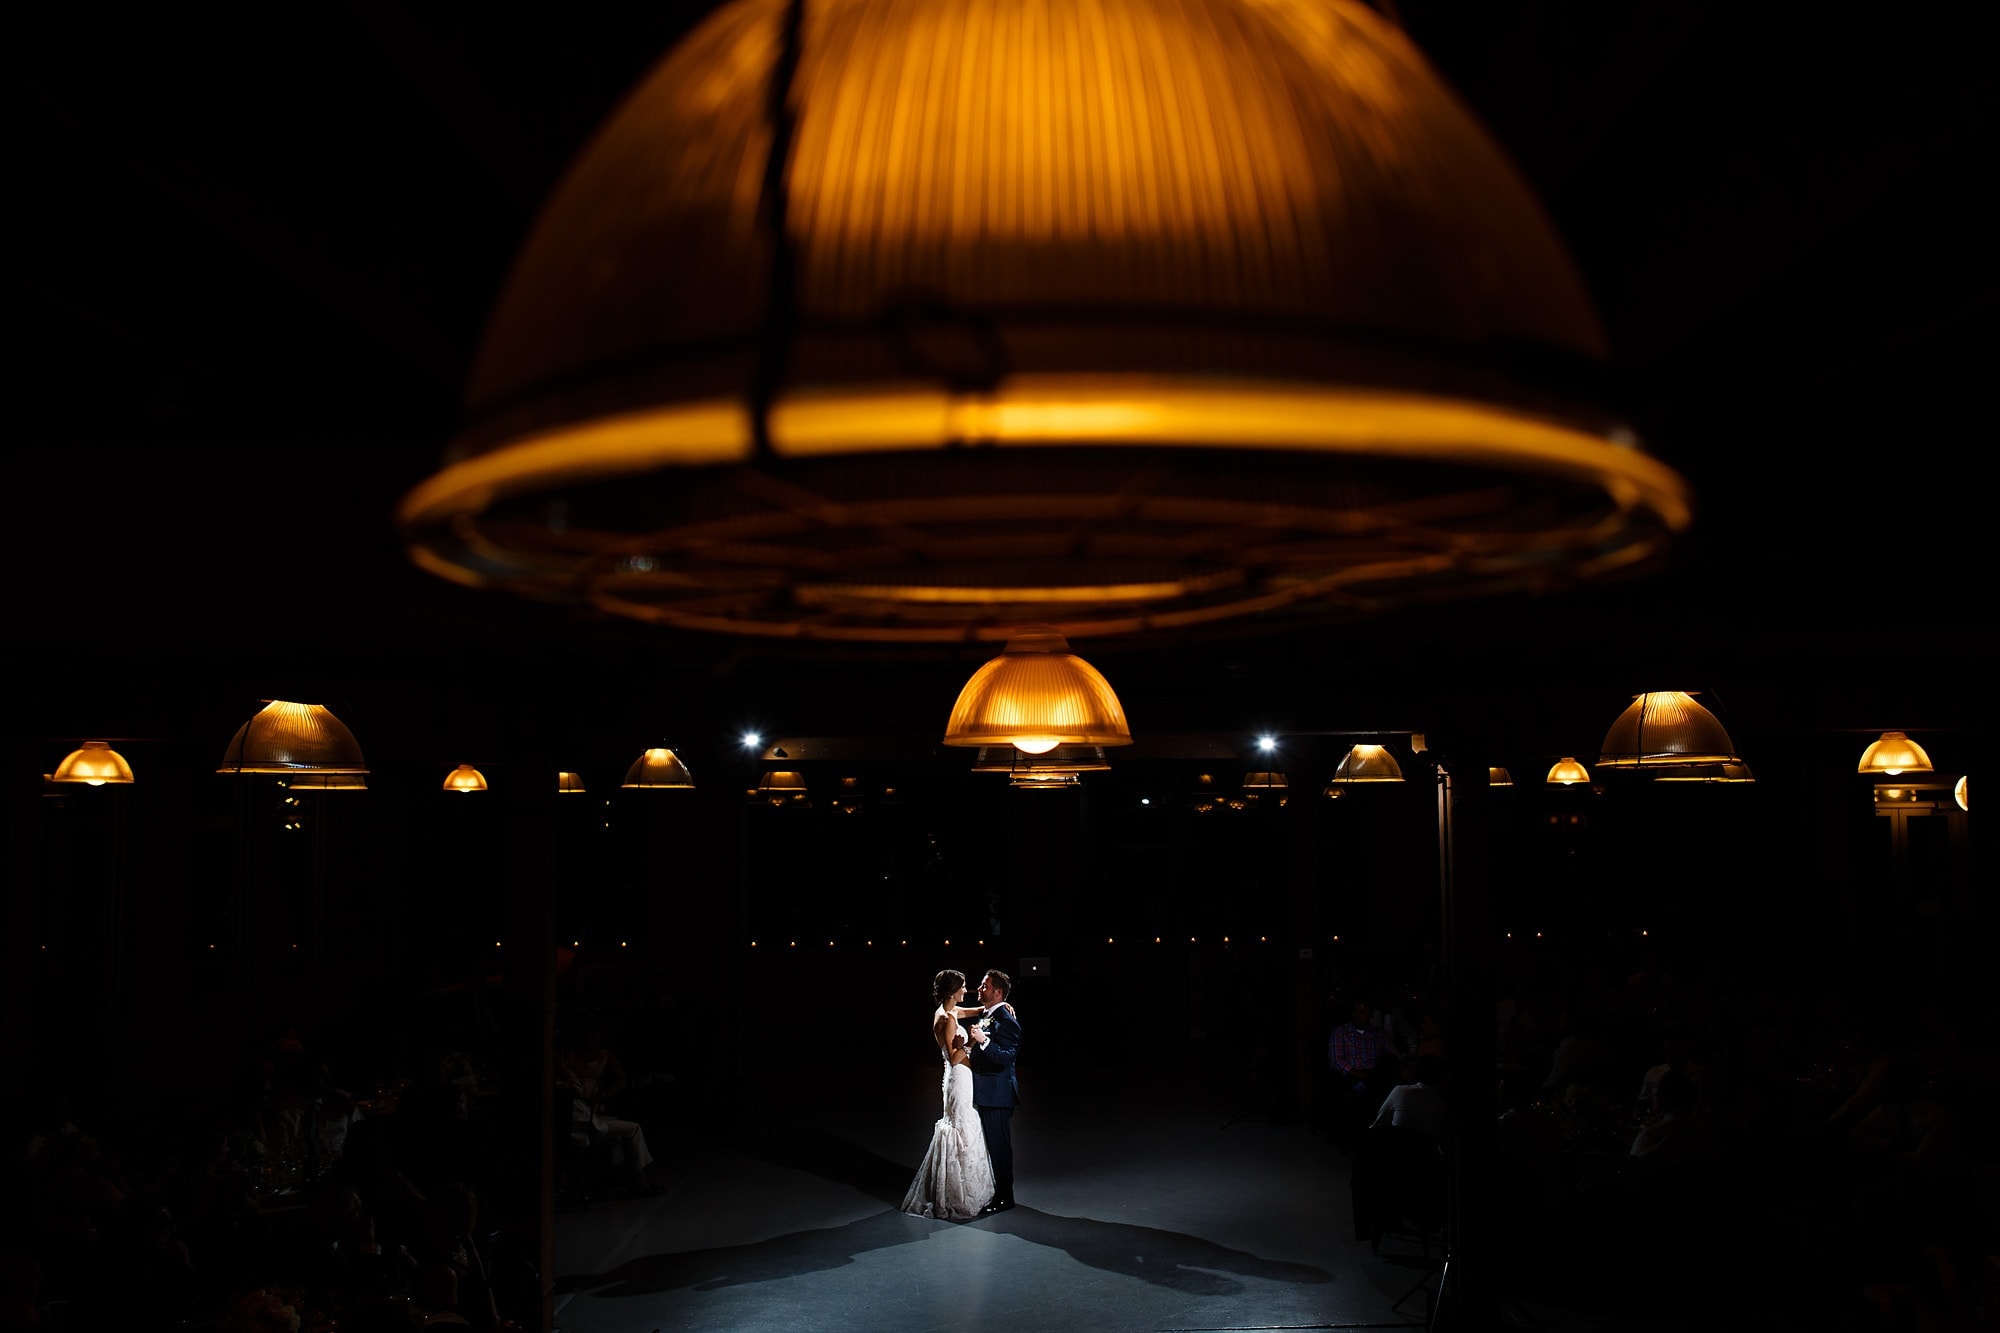 A couple share their first dance at Architectural Artifacts in the Ravenswood neighborhood of Chicago, Illinois.